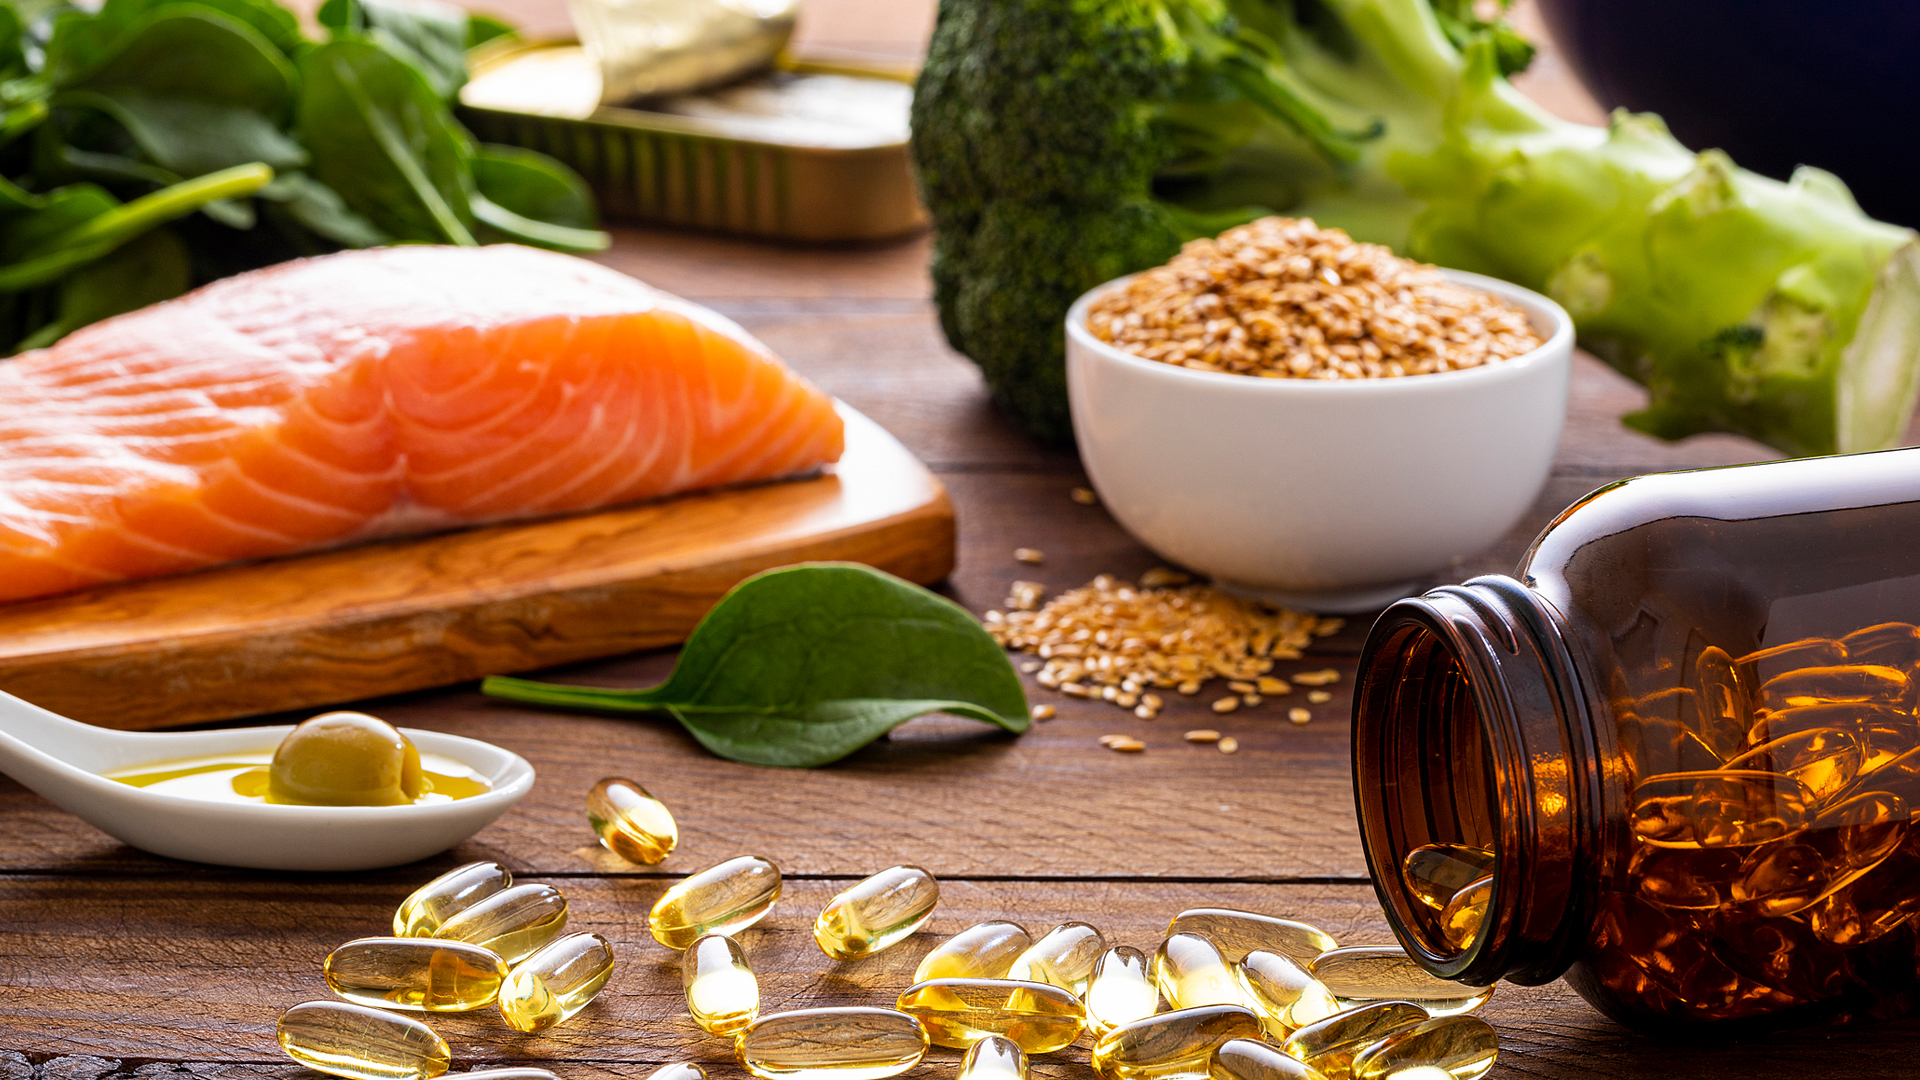 Stock image of sources of polyunsaturated fats: a filet of salmon, bowl of seeds, and spilled bottle of fish oil, all next to one another on a wood surface.